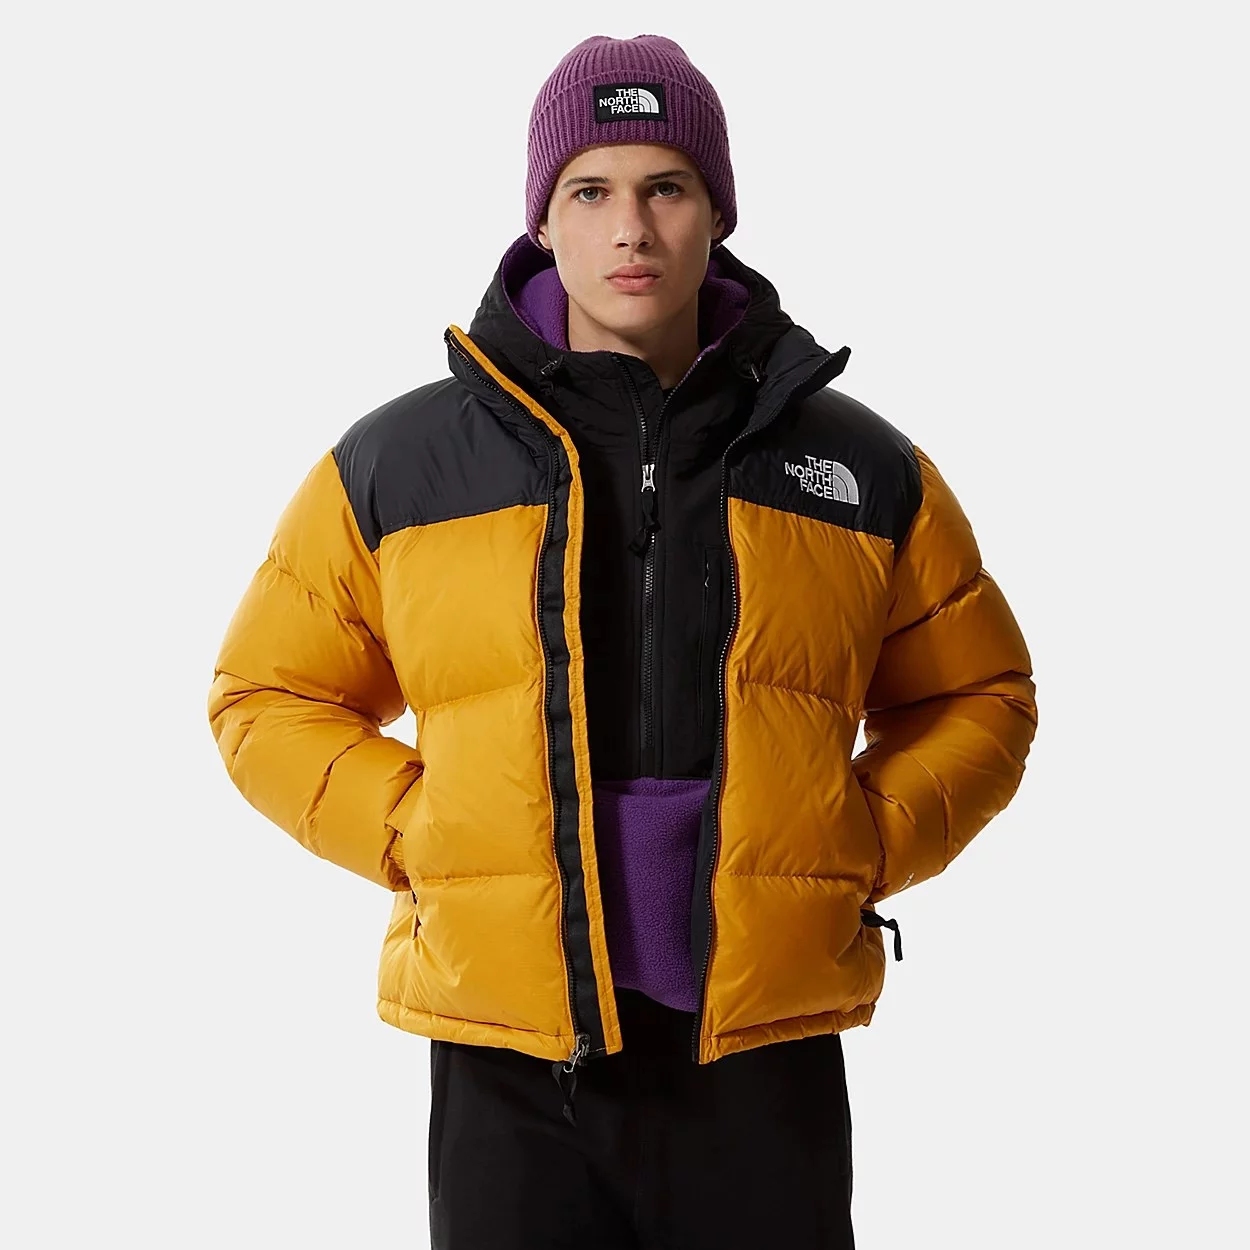 Puffer jacket The North Face 1996 Retro Nuptse Jacket NF0A3C8DH9D1 ...